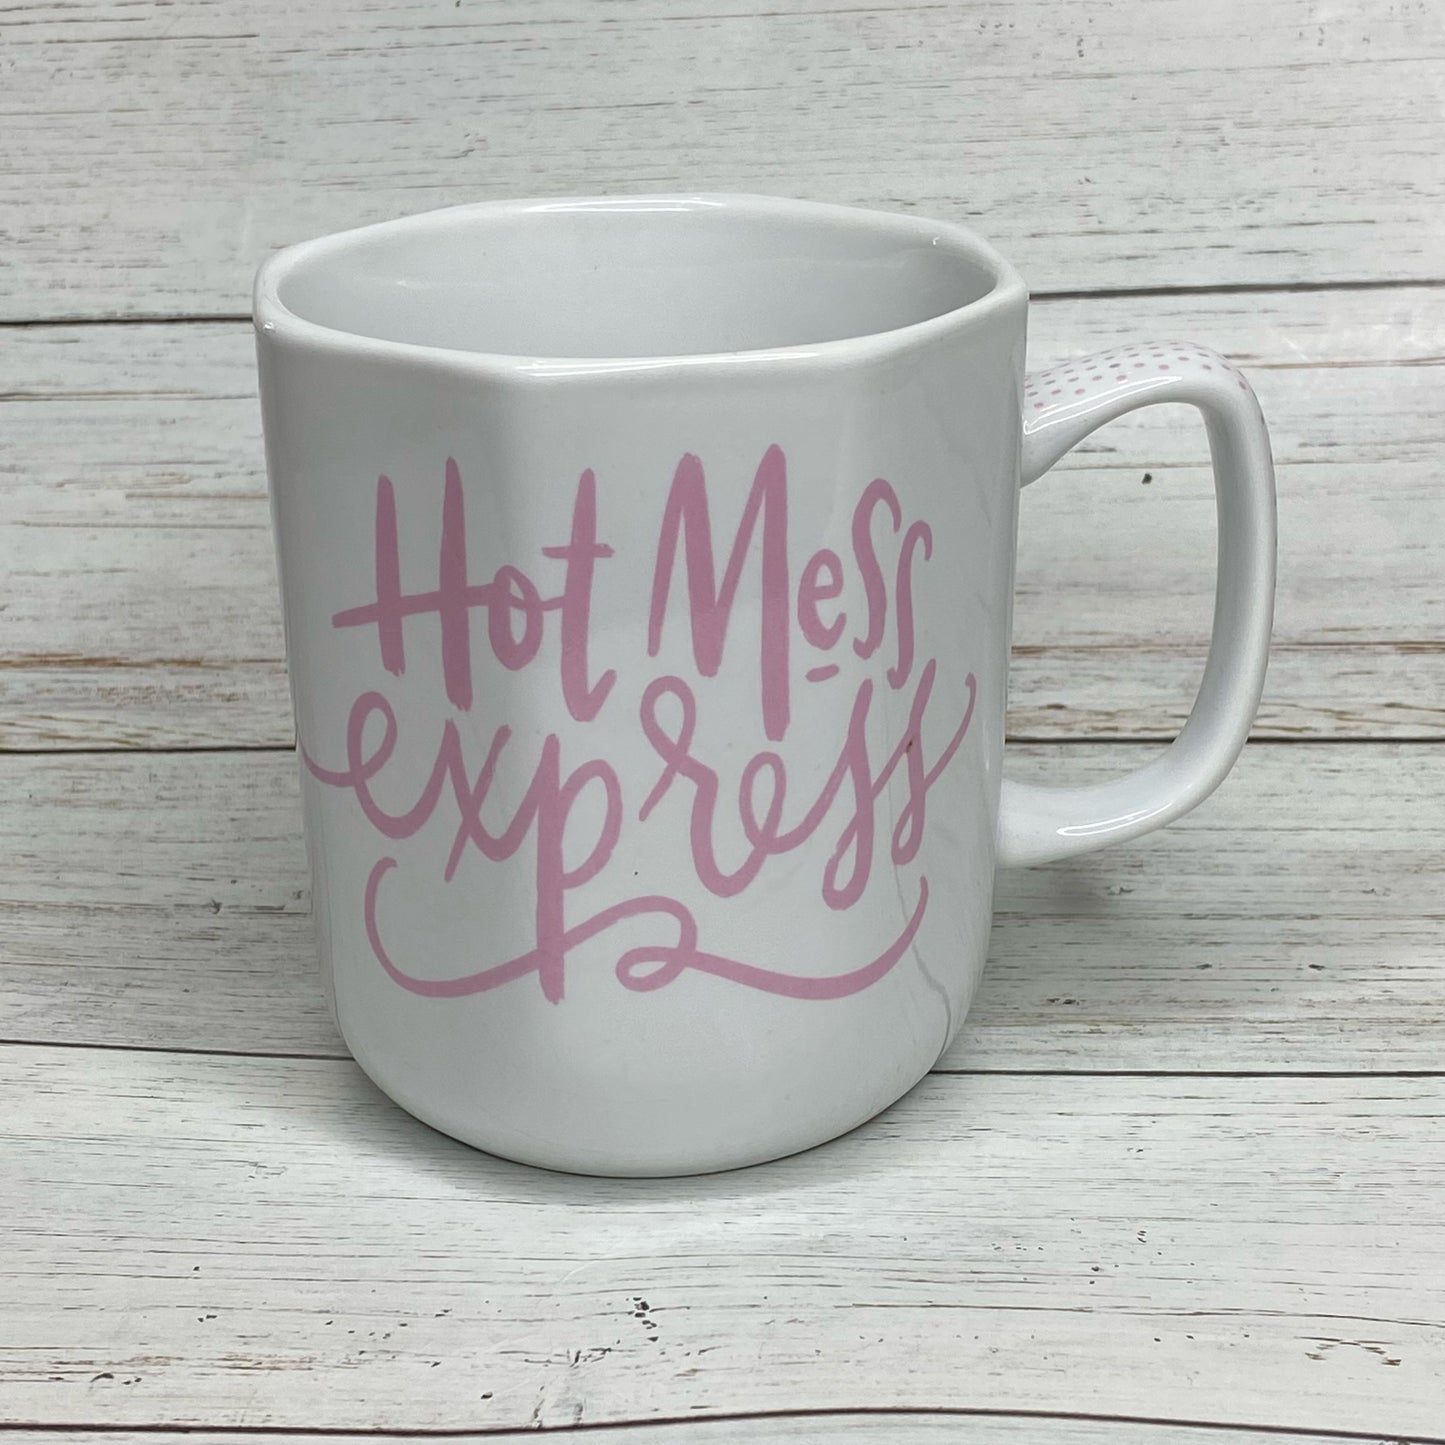 Hot Mess Express Coffee Cup